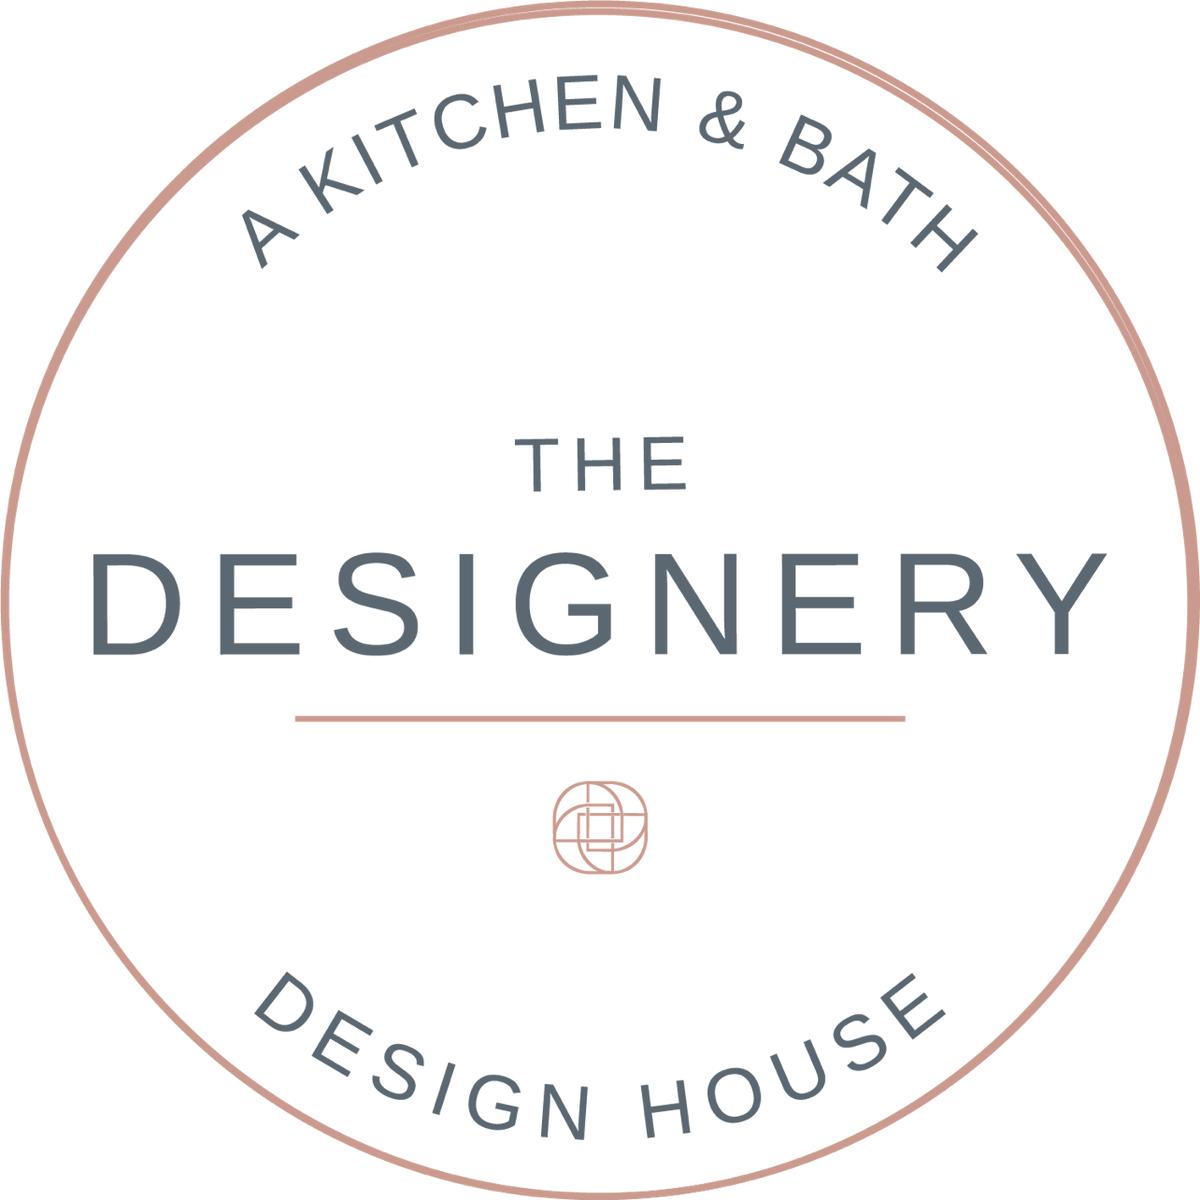 The Designery's images